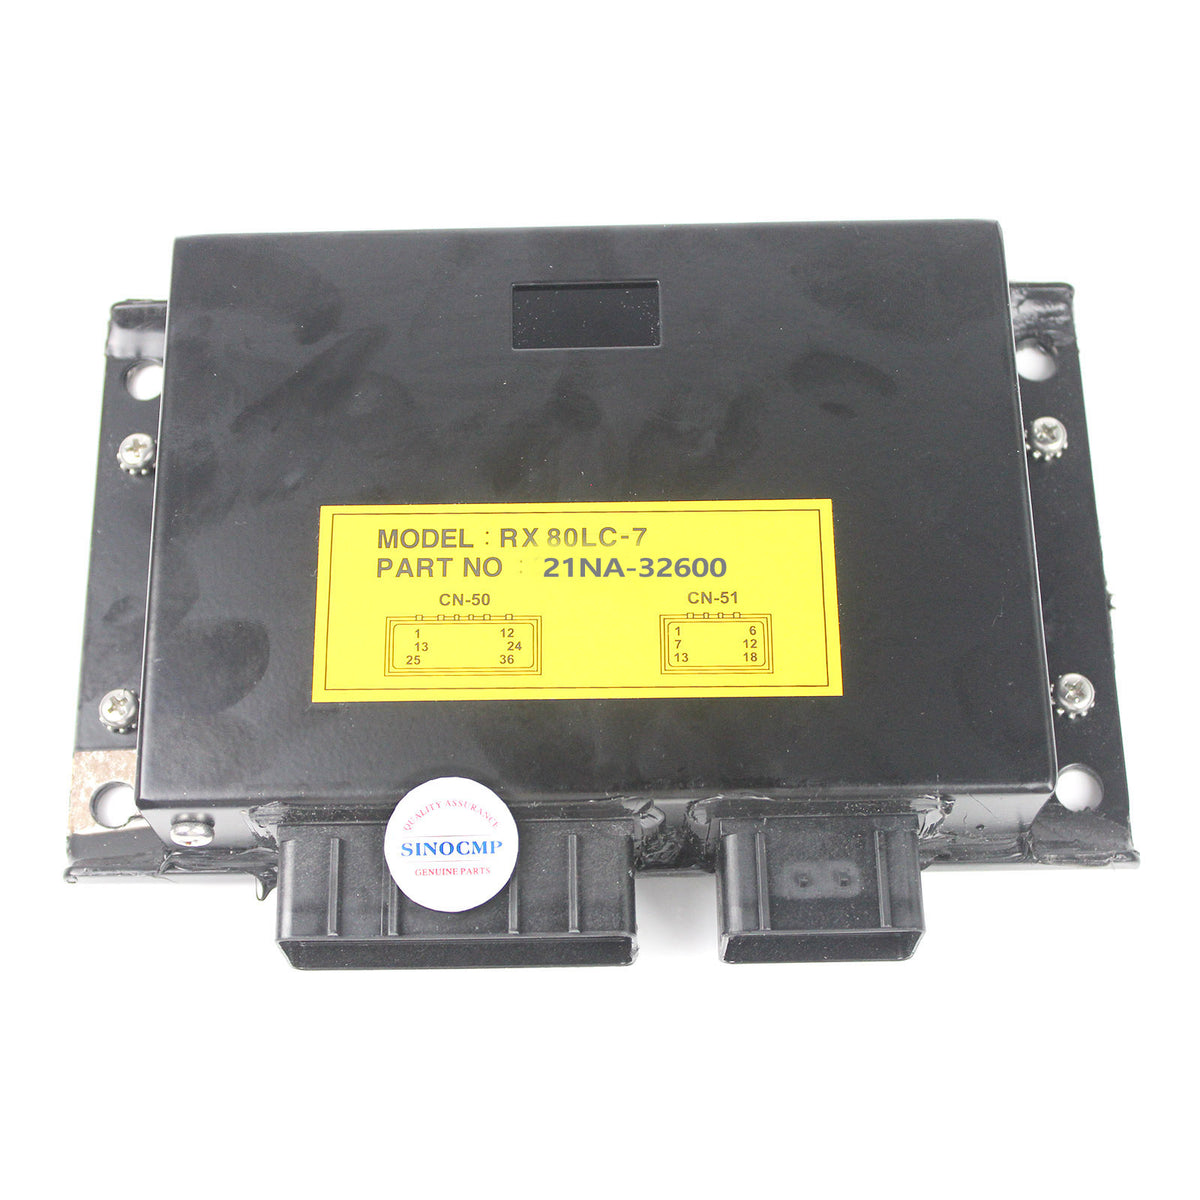 21NA-32600 Controller Programmed for Hyundai ROBEX R360LC-7